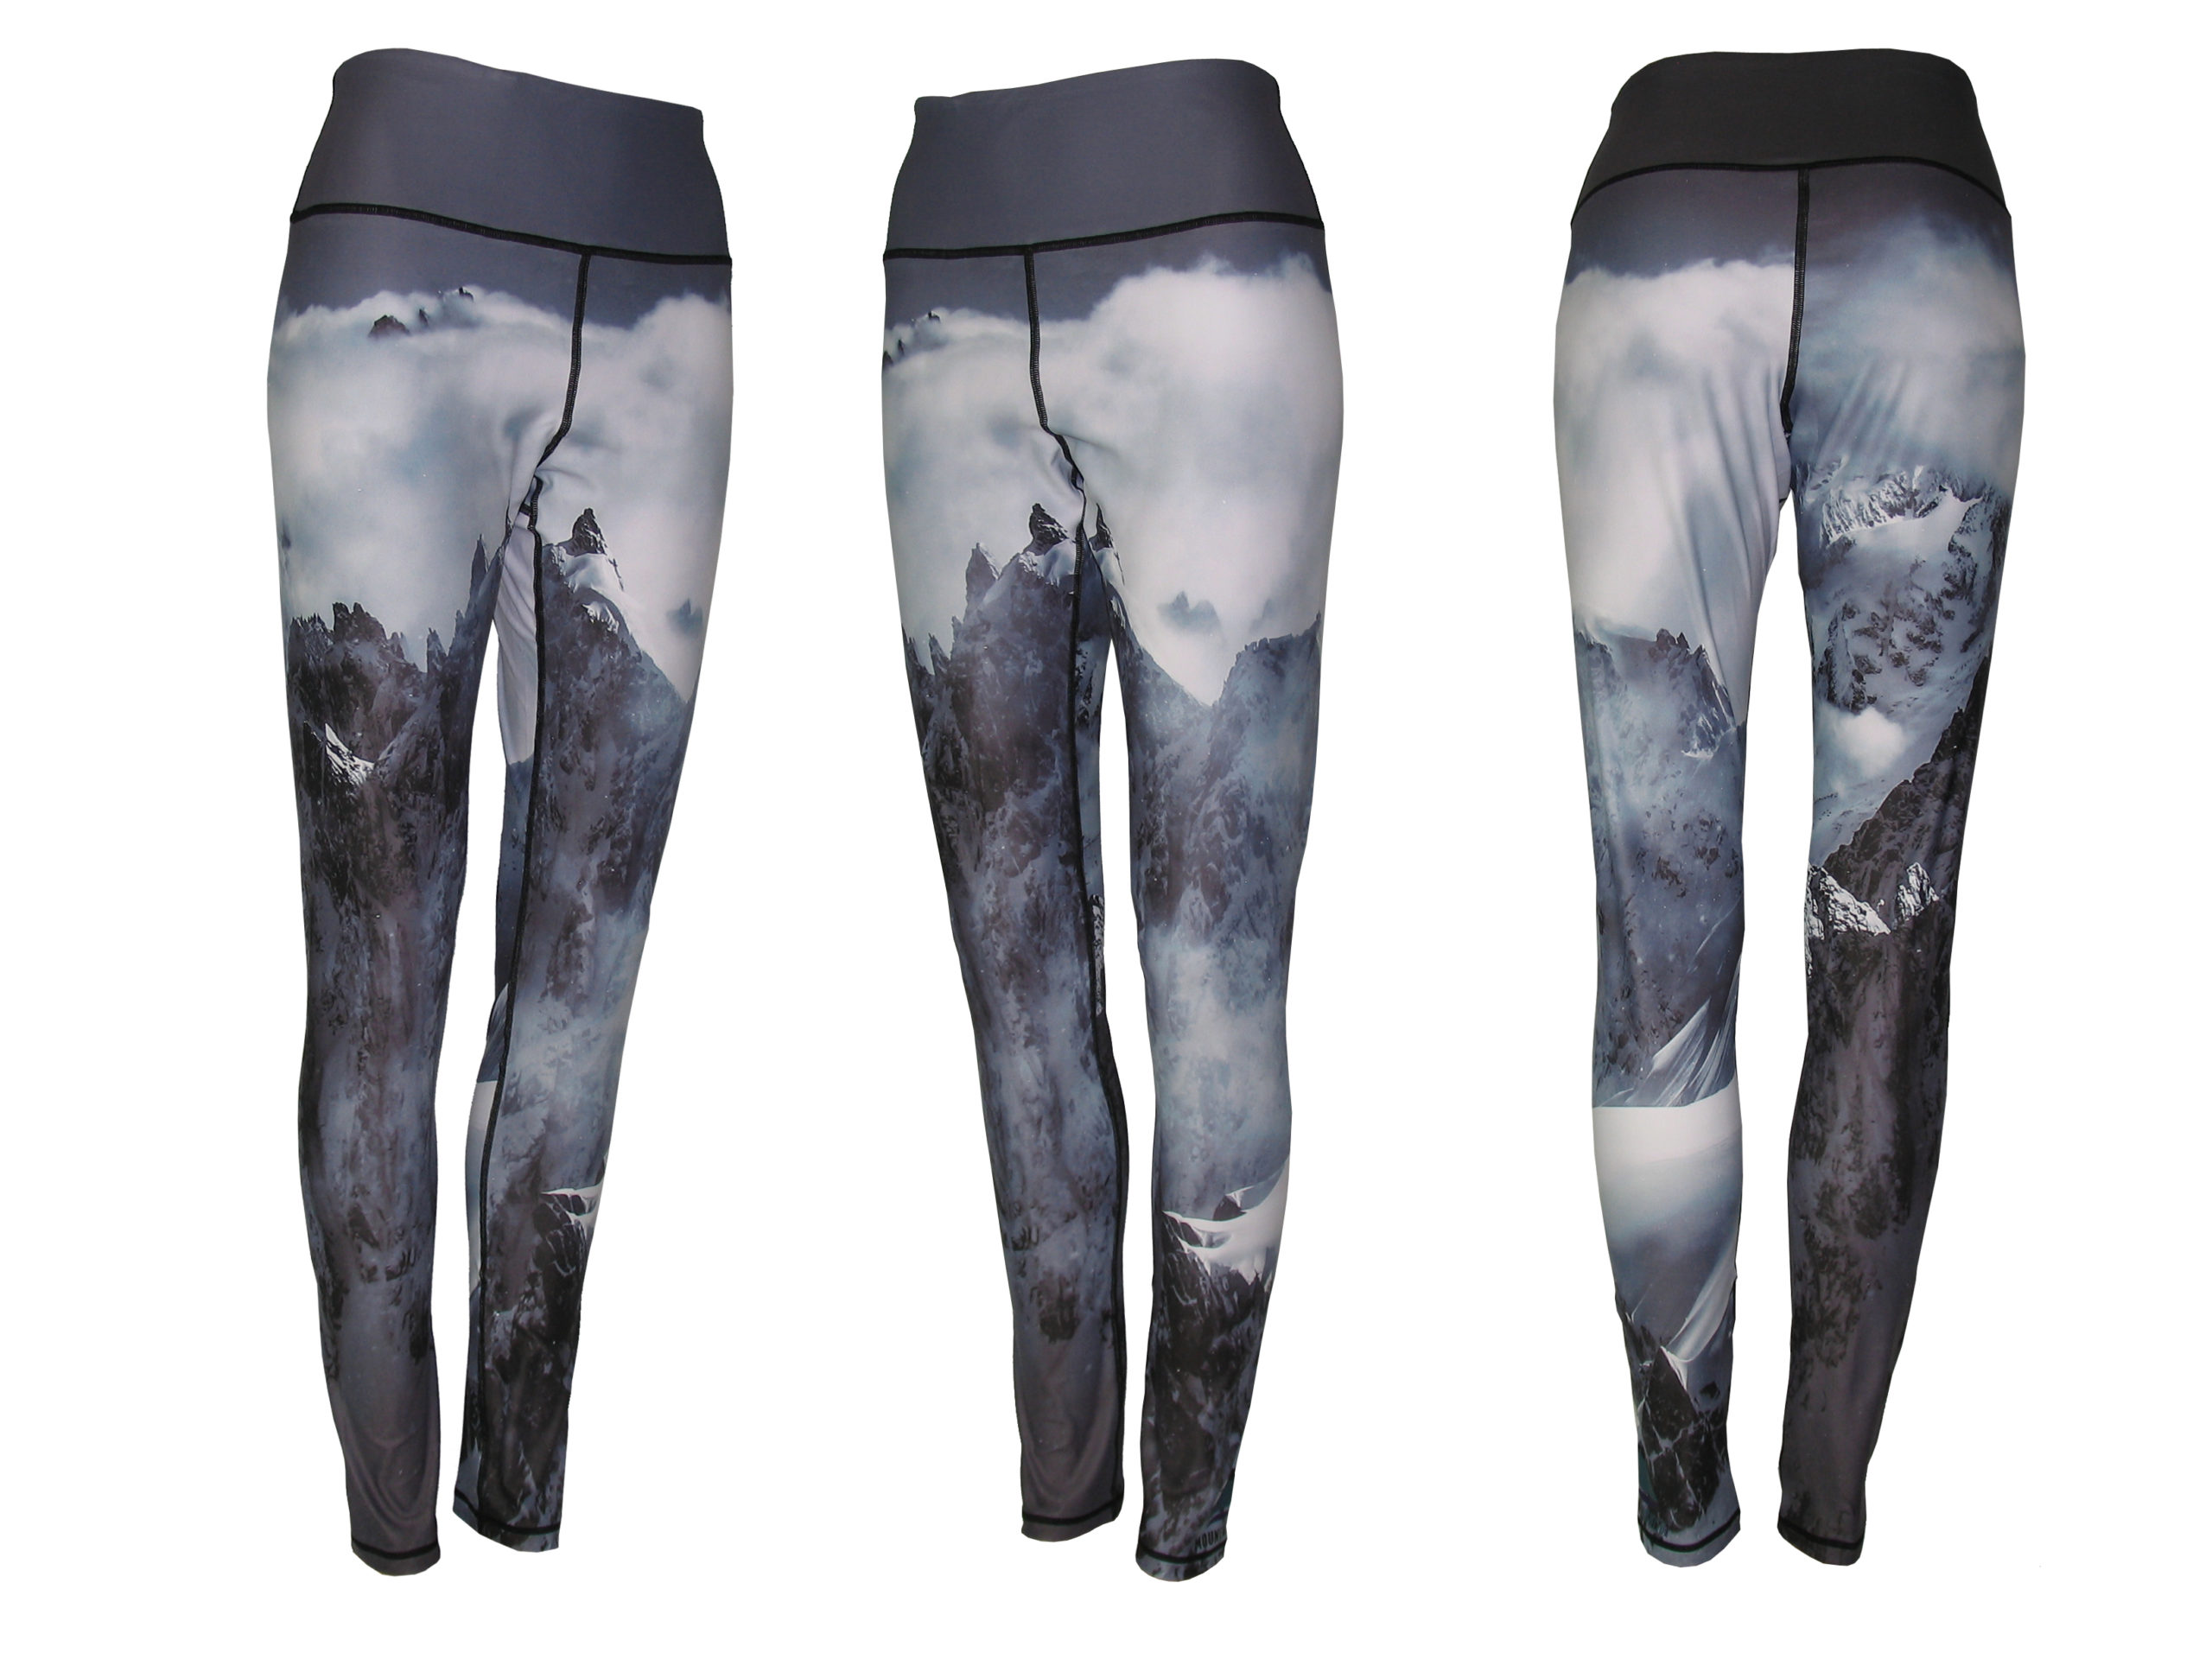 Jagged Edge Yoga Pants All Sport Leggings image taking a helicopter ride to a beautiful panoramic mountain peak skiing off a cornice of your dreams